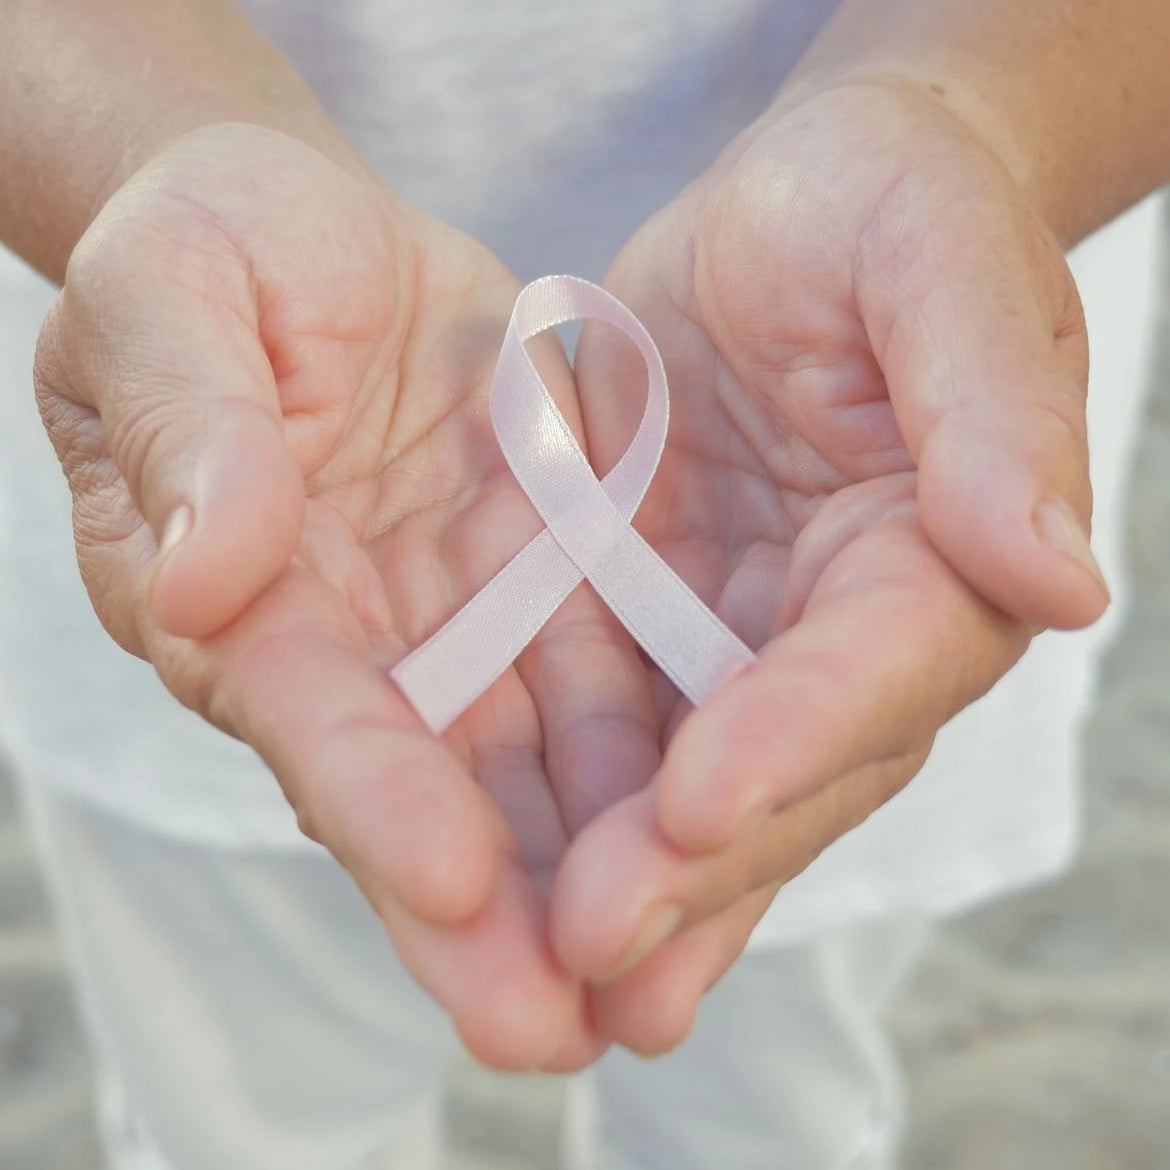 Hands holding a cancer ribbon